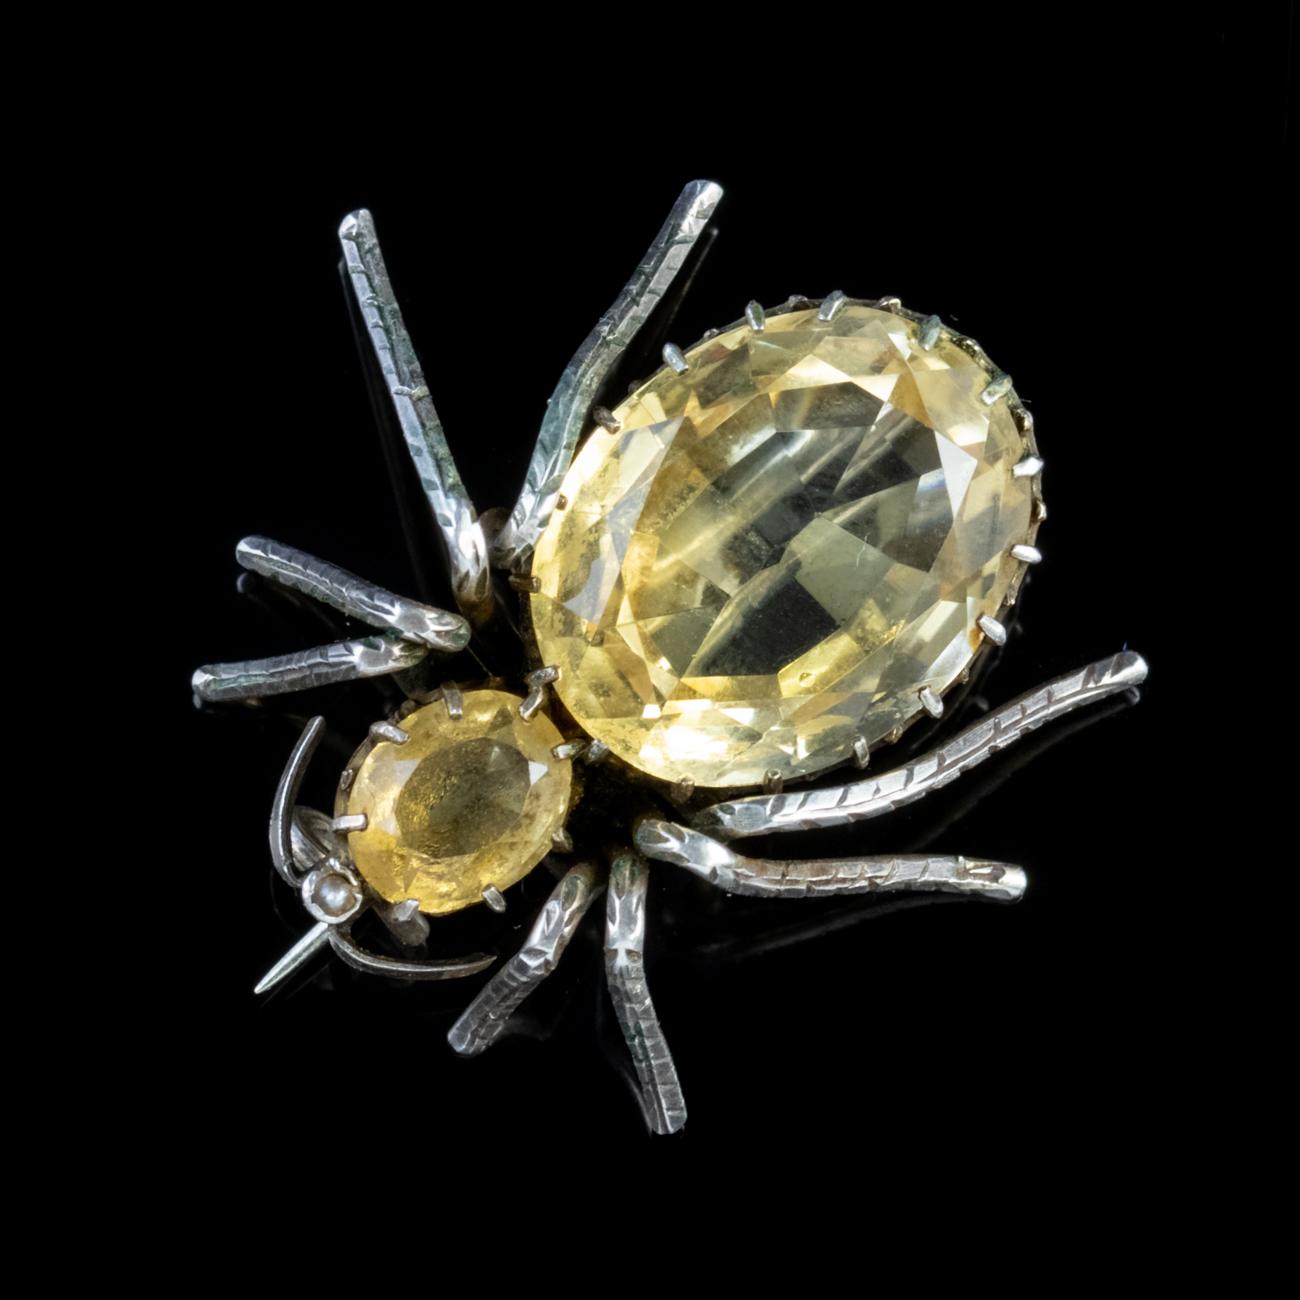 A fascinating Antique Victorian Brooch in the shape of a Spider, made from Silver and adorned with two large Citrine Stones, one measuring 15ct and the other 1.50ct.

Insect jewellery is highly collectable and was once considered a symbol of good